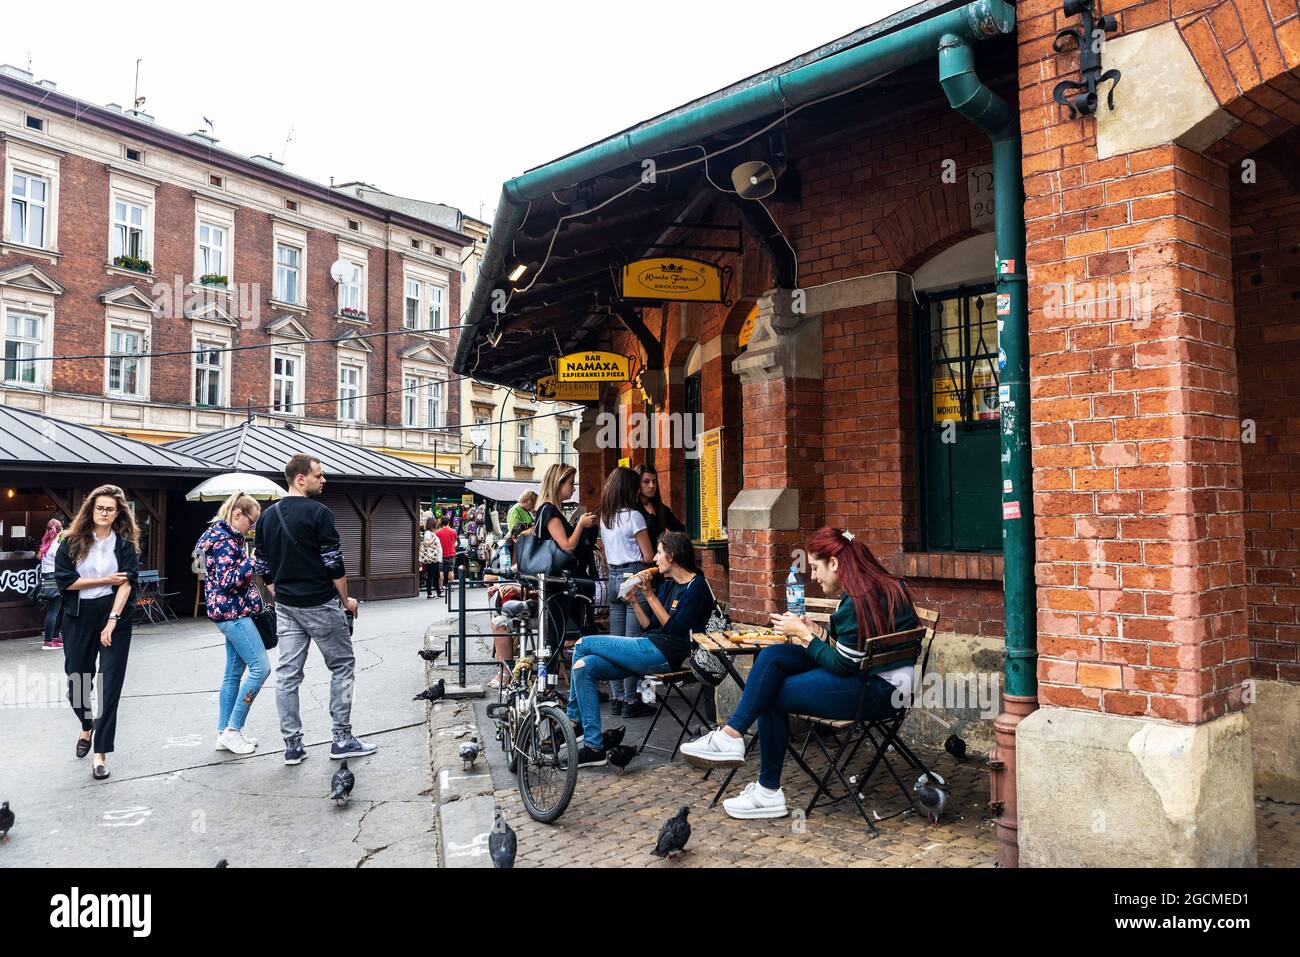 Krakow, Poland - August 28, 2018: People in a bar eating the traditional zapiekanka, a baguette with various toppings in the flea market of the Plac N Stock Photo